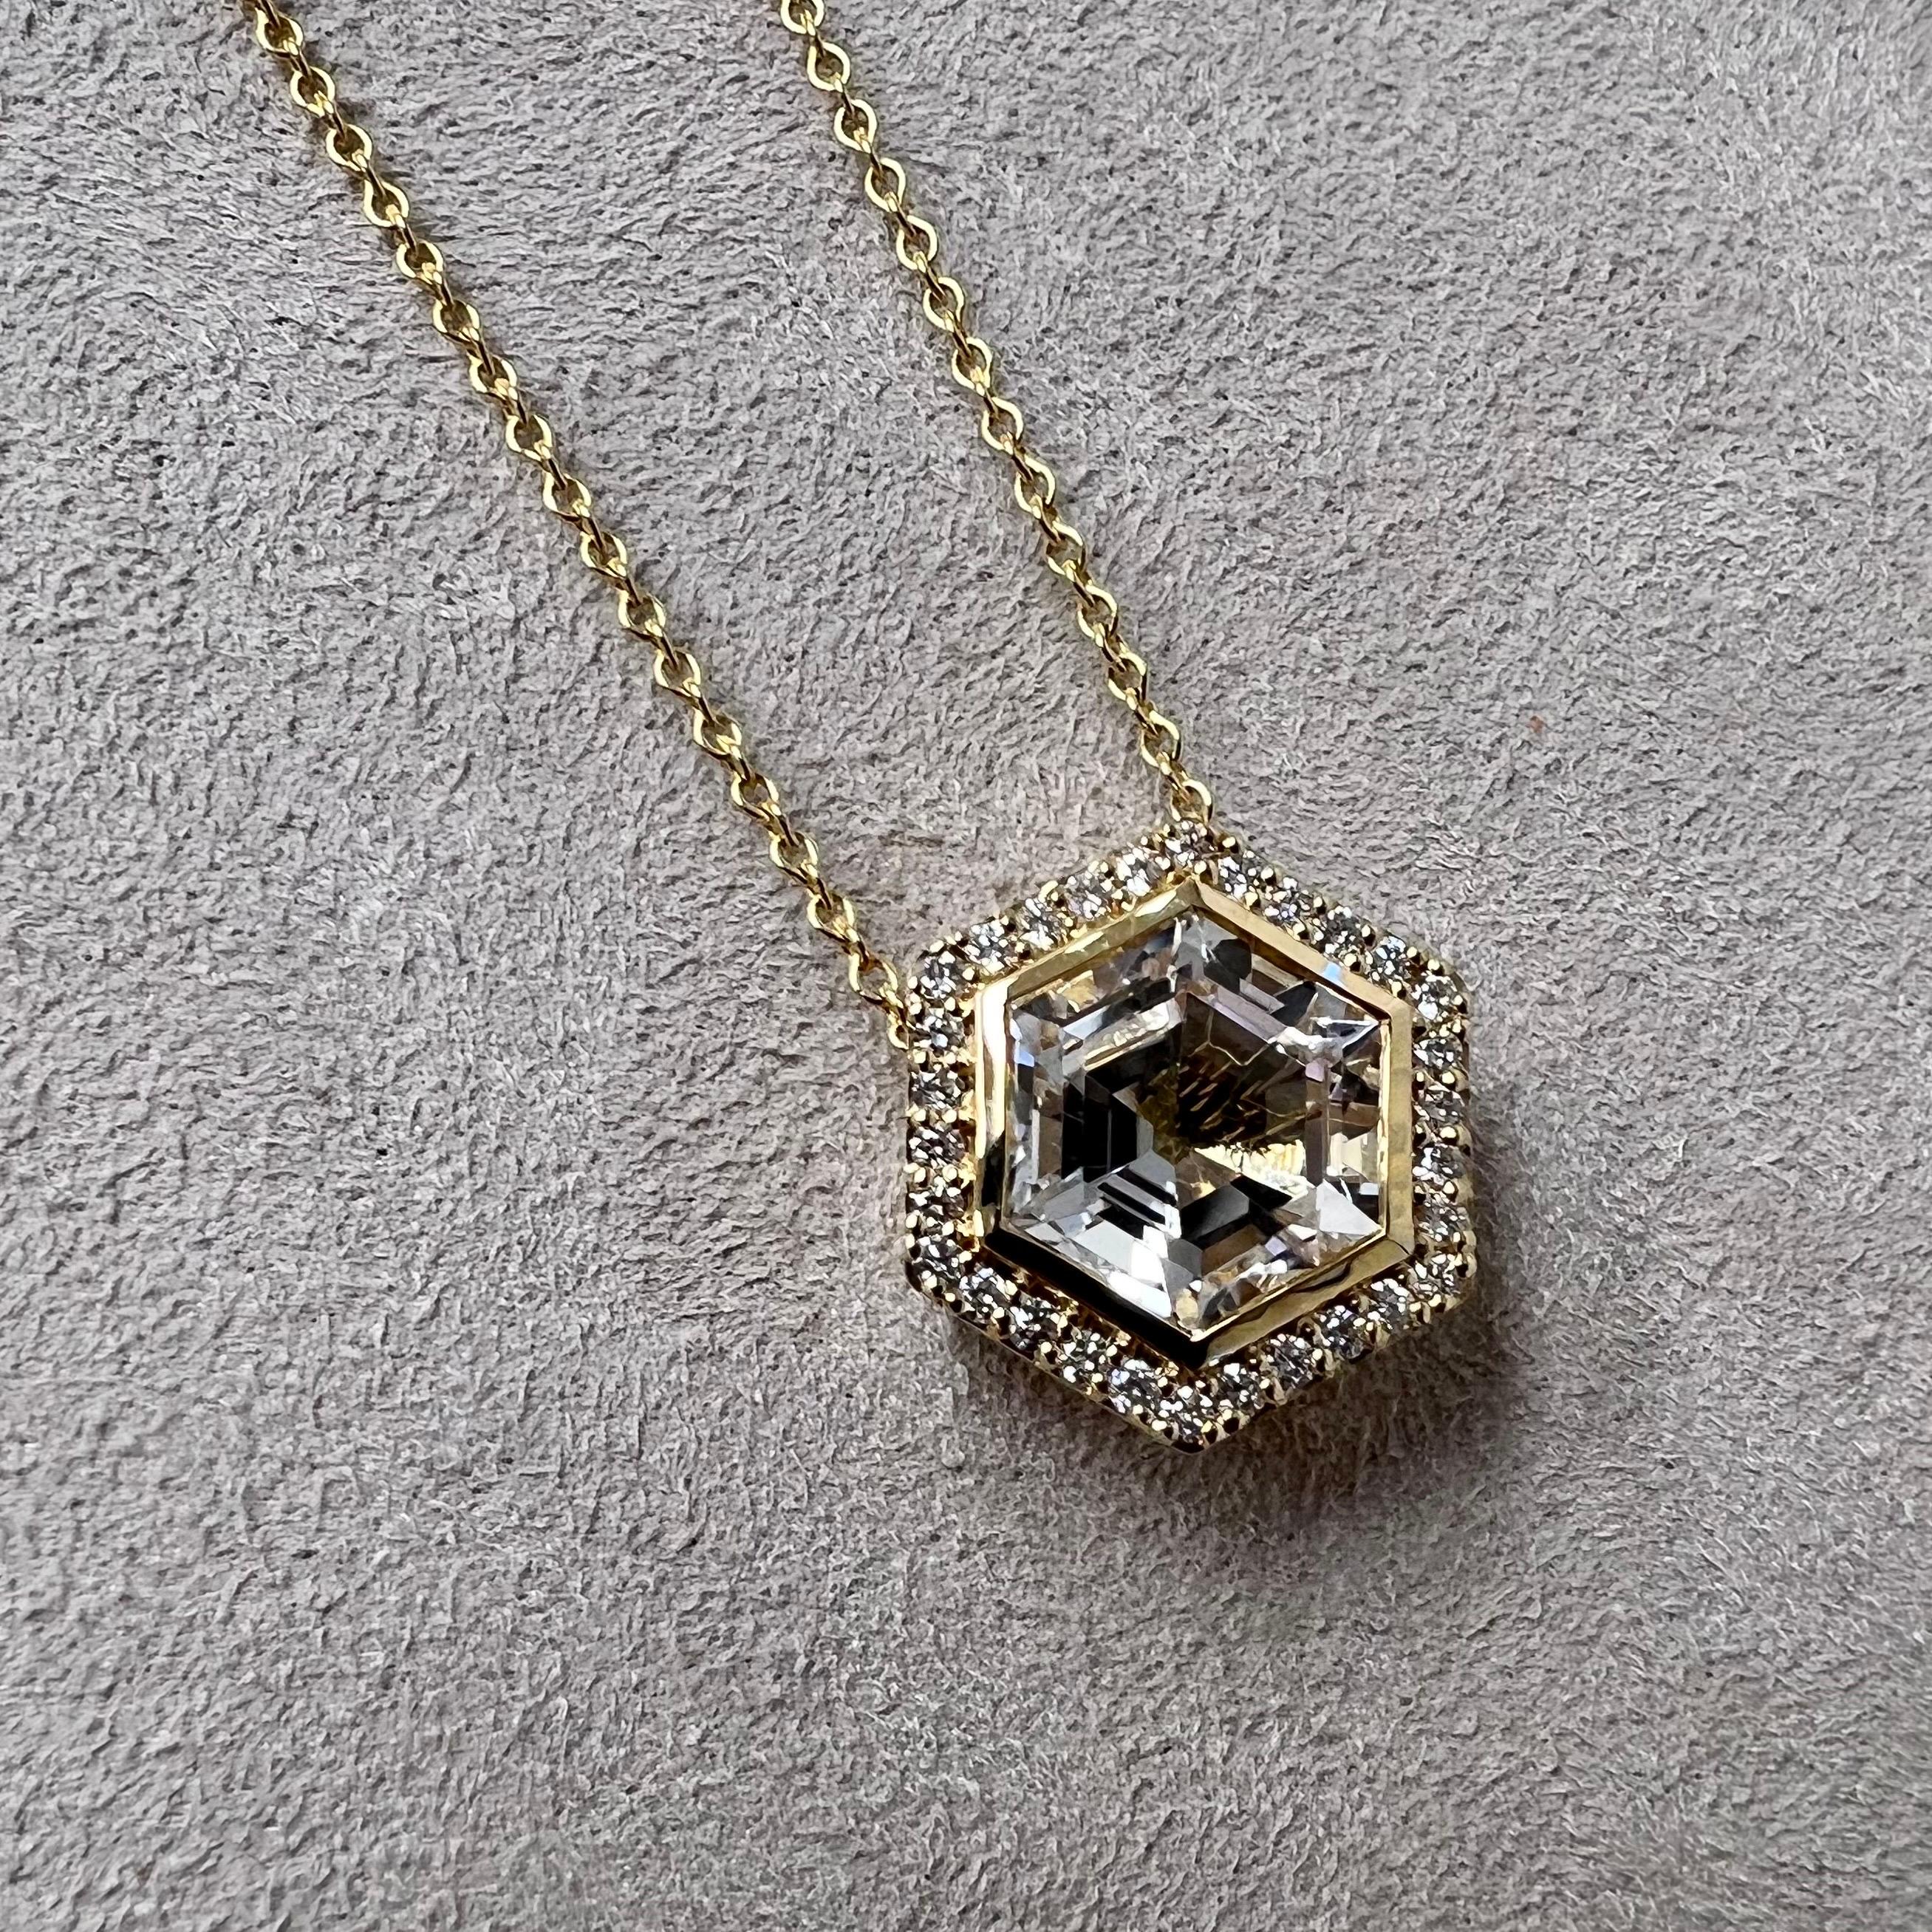 Created in 18 karat yellow gold
Rock crystal 8 carats approx.
Diamonds 0.35 carat approx.
18 inch, adjustable at 16-17
Limited edition

Crafted from 18 karat yellow gold, this limited edition necklace features a dazzling 8-carat Rock Crystal and